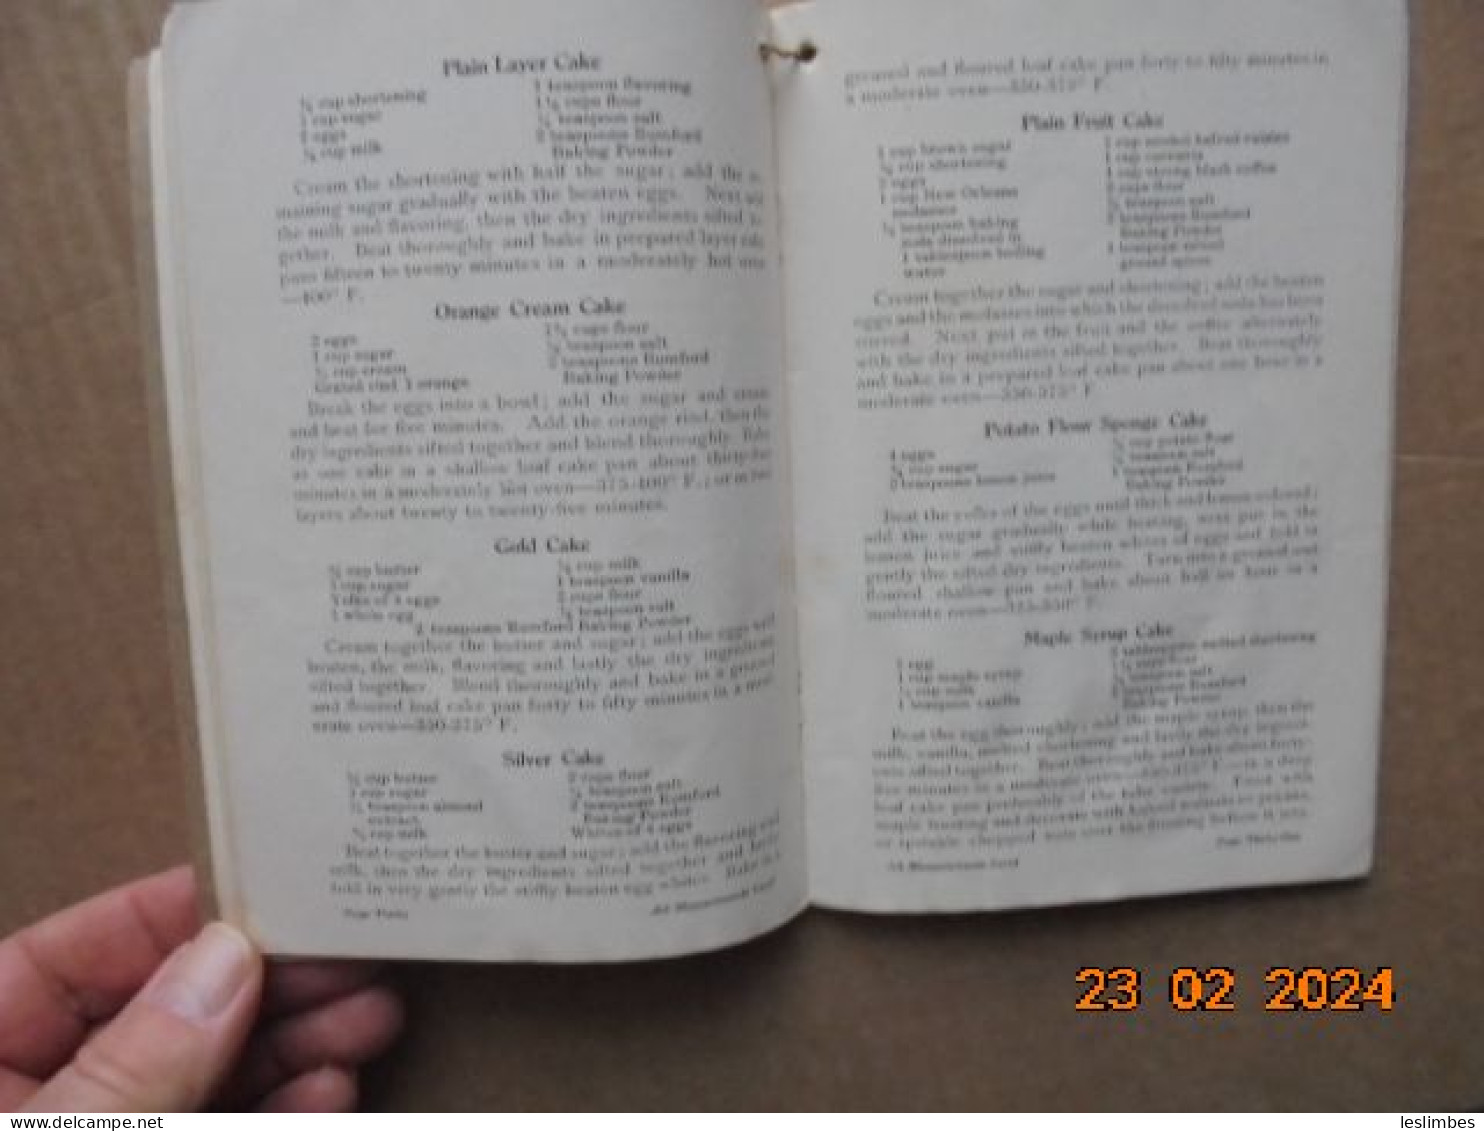 Rumford Common Sense Cook Book - Lily Haxworth Wallace - Rumford Chemical Works - Américaine